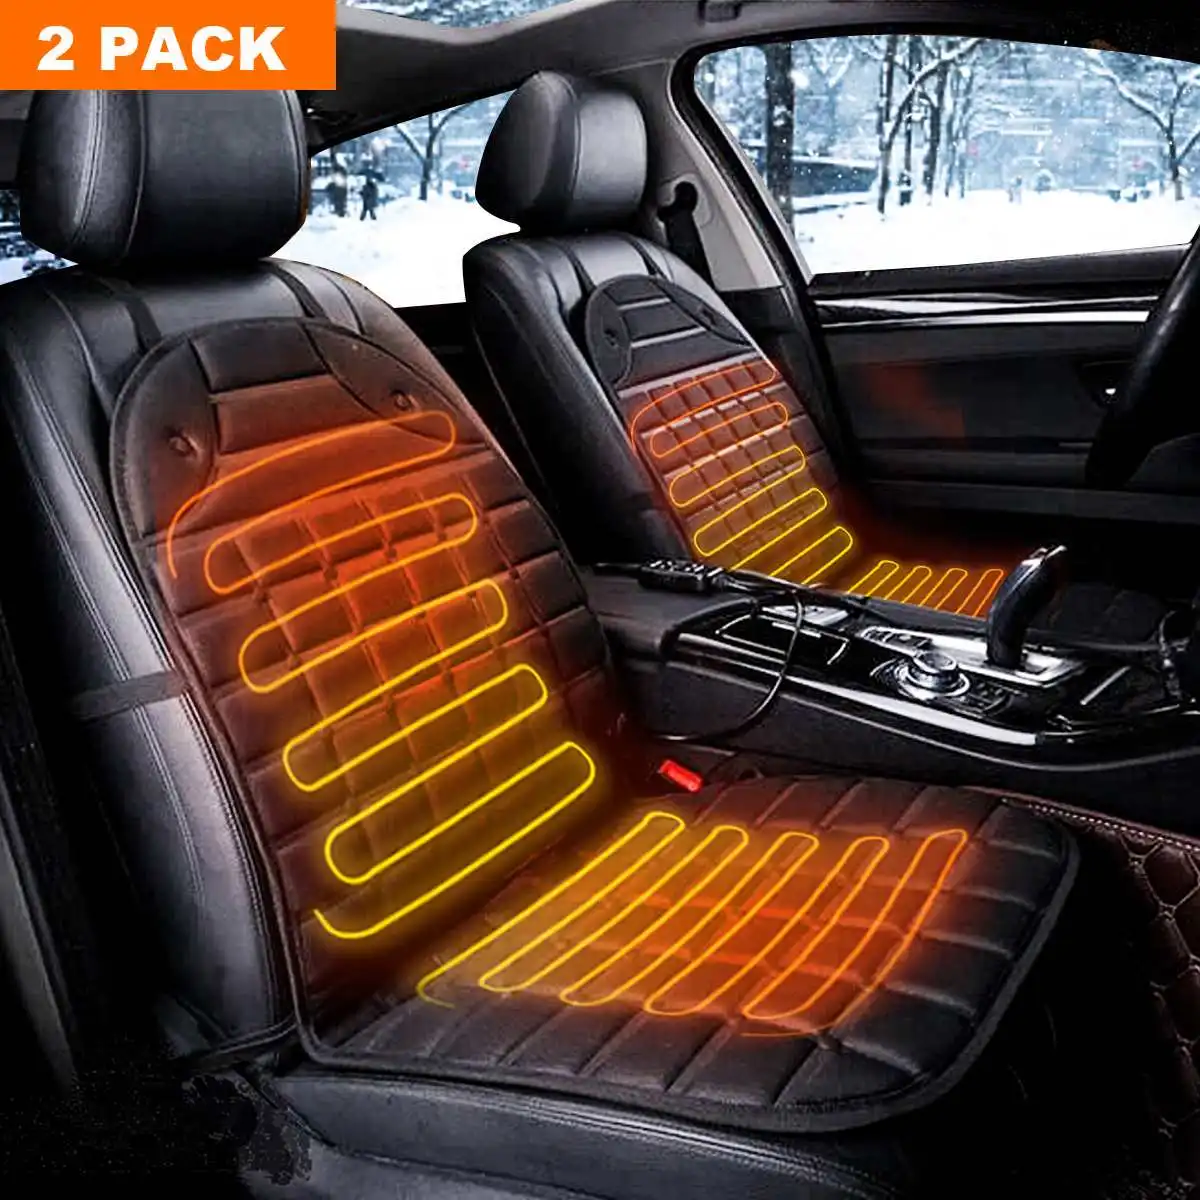 Qhui Seat Heating Car Pad 12v Truck or Boat Black Universal Heating Pad Heating Pad Seat Pad with Time Temperature Controller for Car 